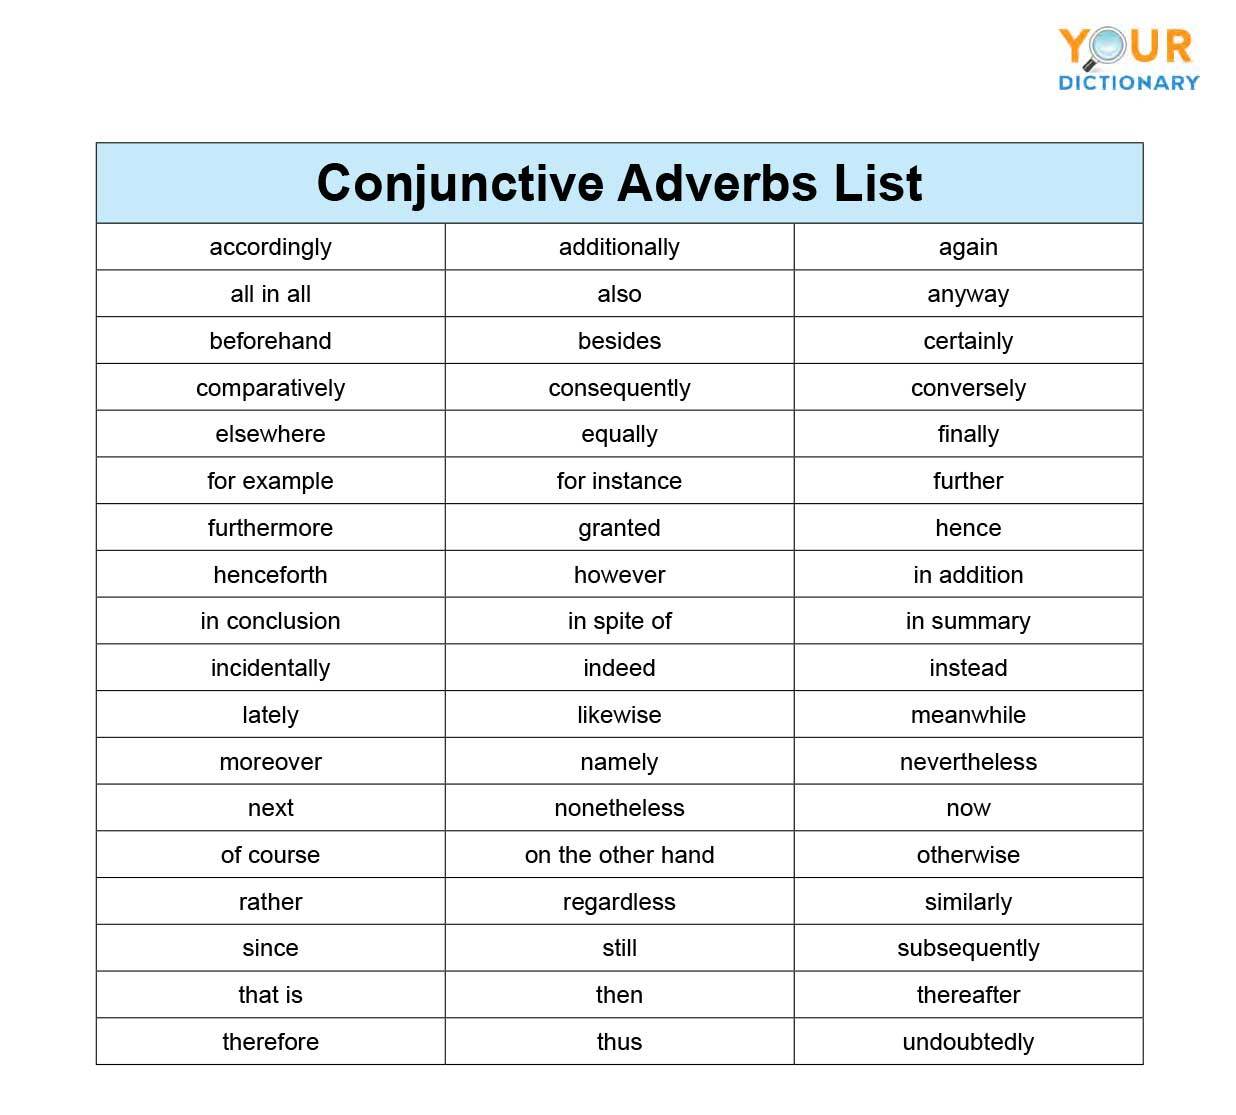 Insignificant Scholarship Vacation Conjunctive Adverbs: Purpose and Use